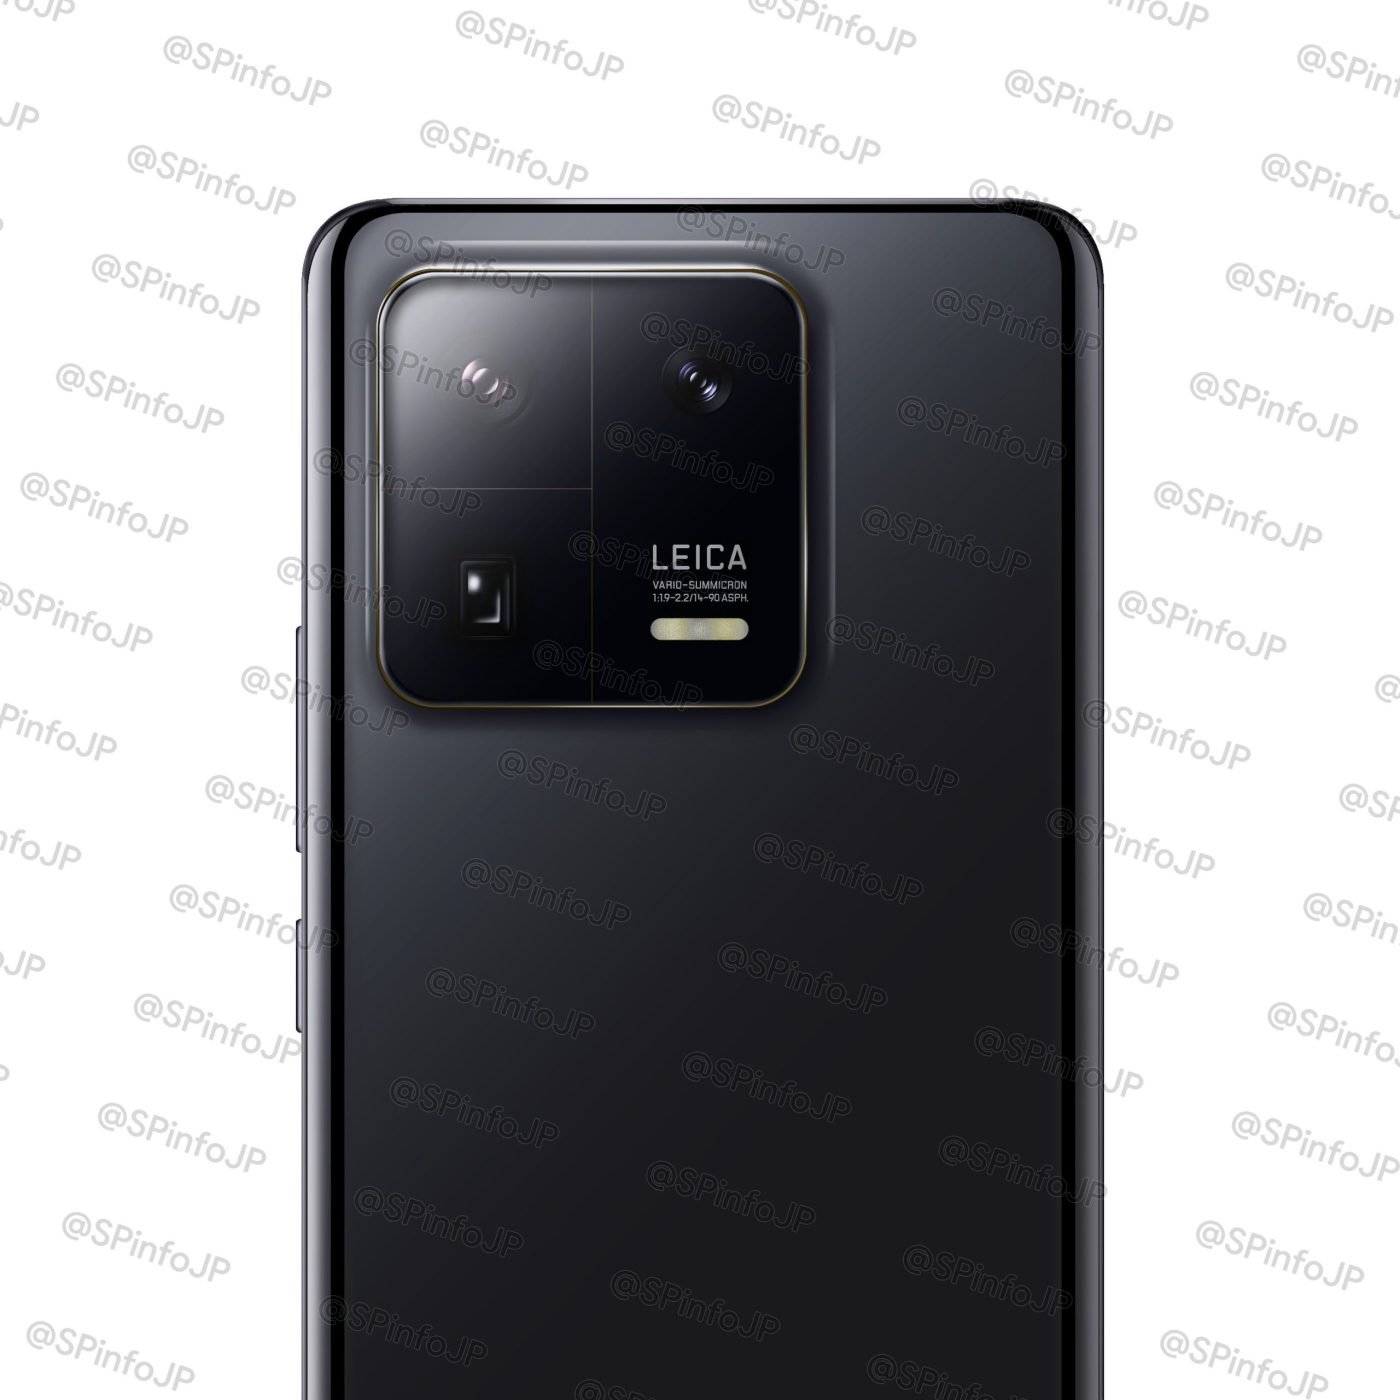 Xiaomi 14 Pro design leaks with chonky camera and flat display